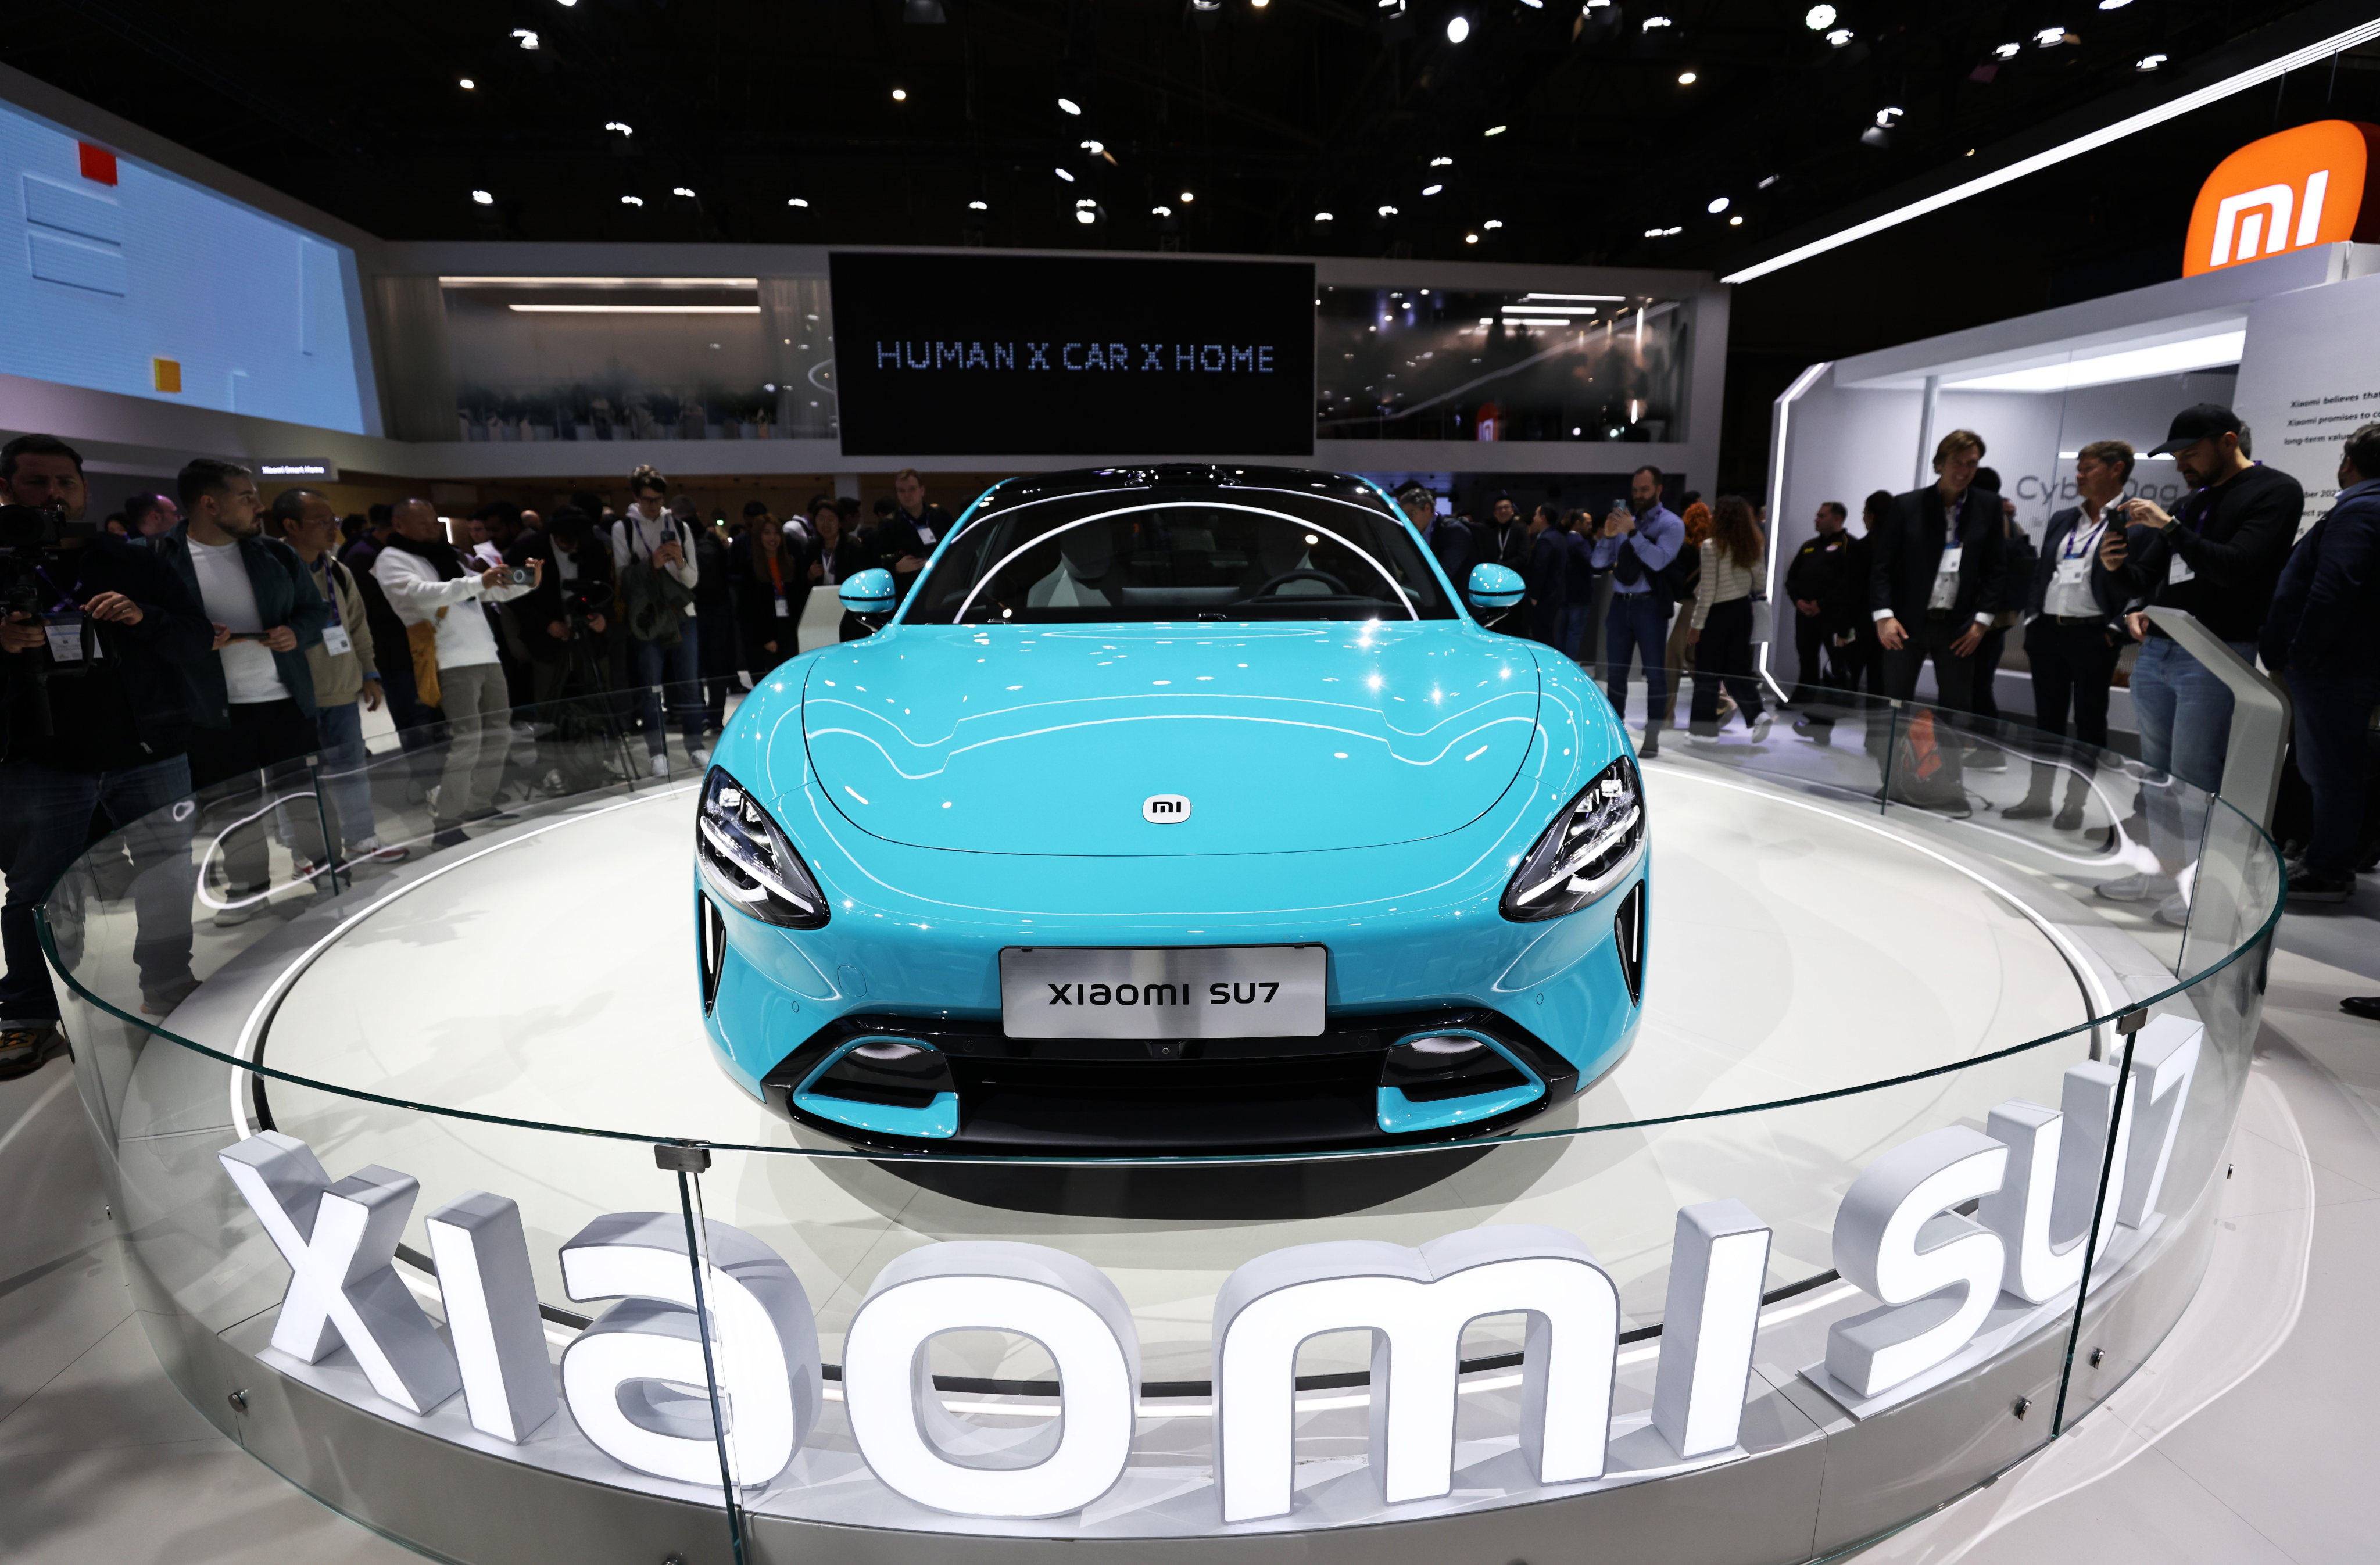 Xiaomi’s SU7 electric car is displayed at the Mobile World Congress in Barcelona, Spain, last month. Photo: Xinhua